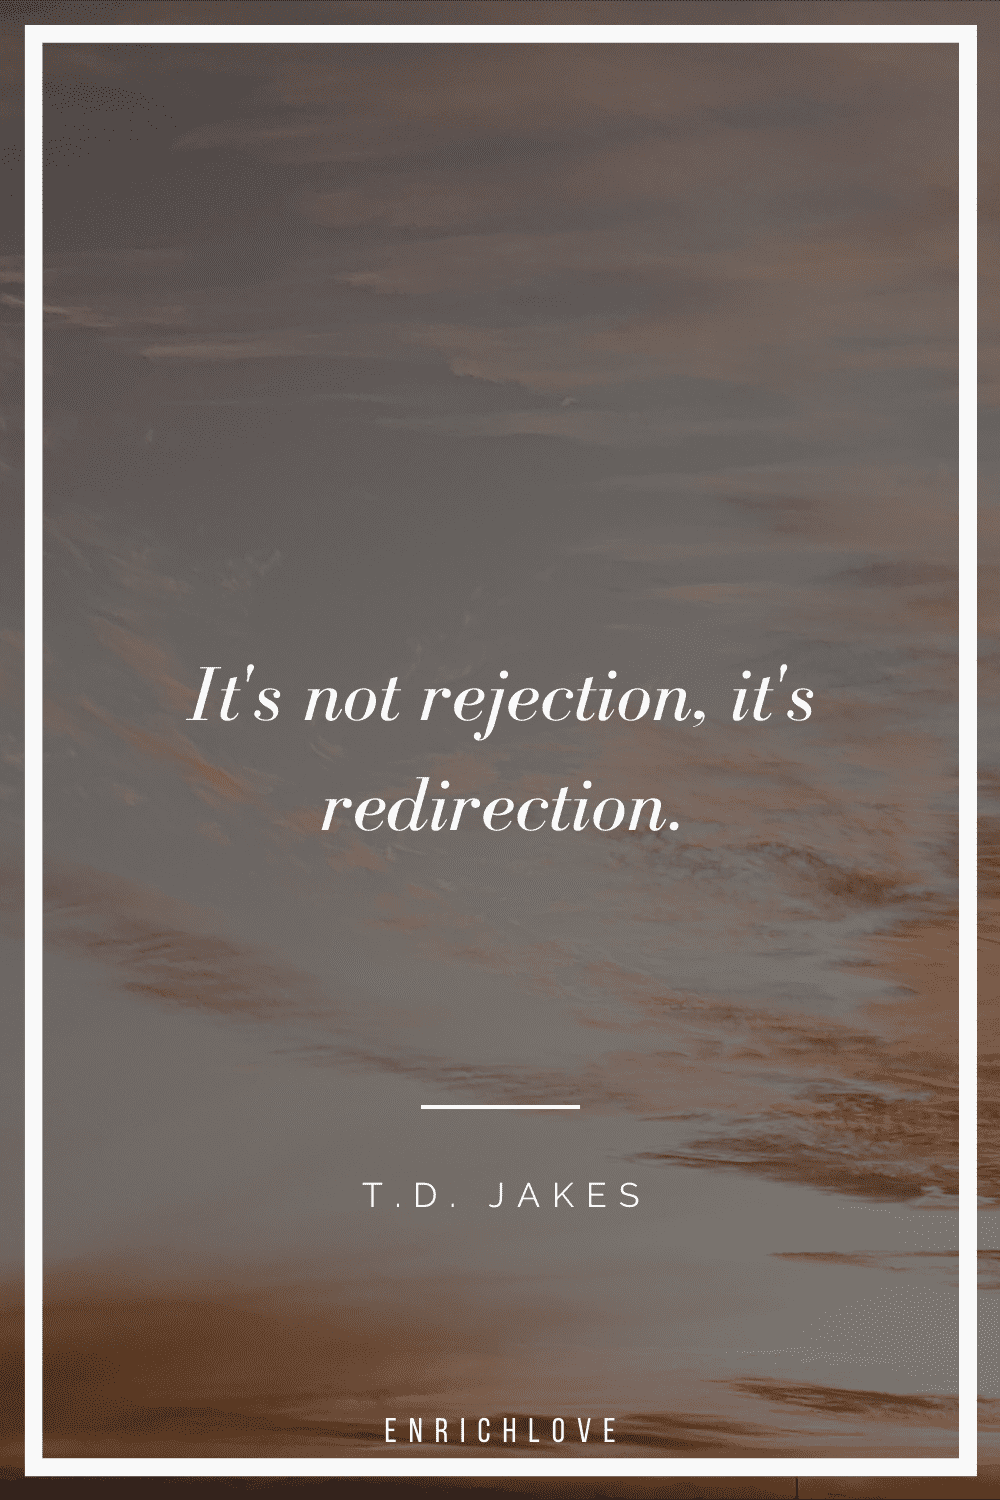 It's not rejection, it's redirection.